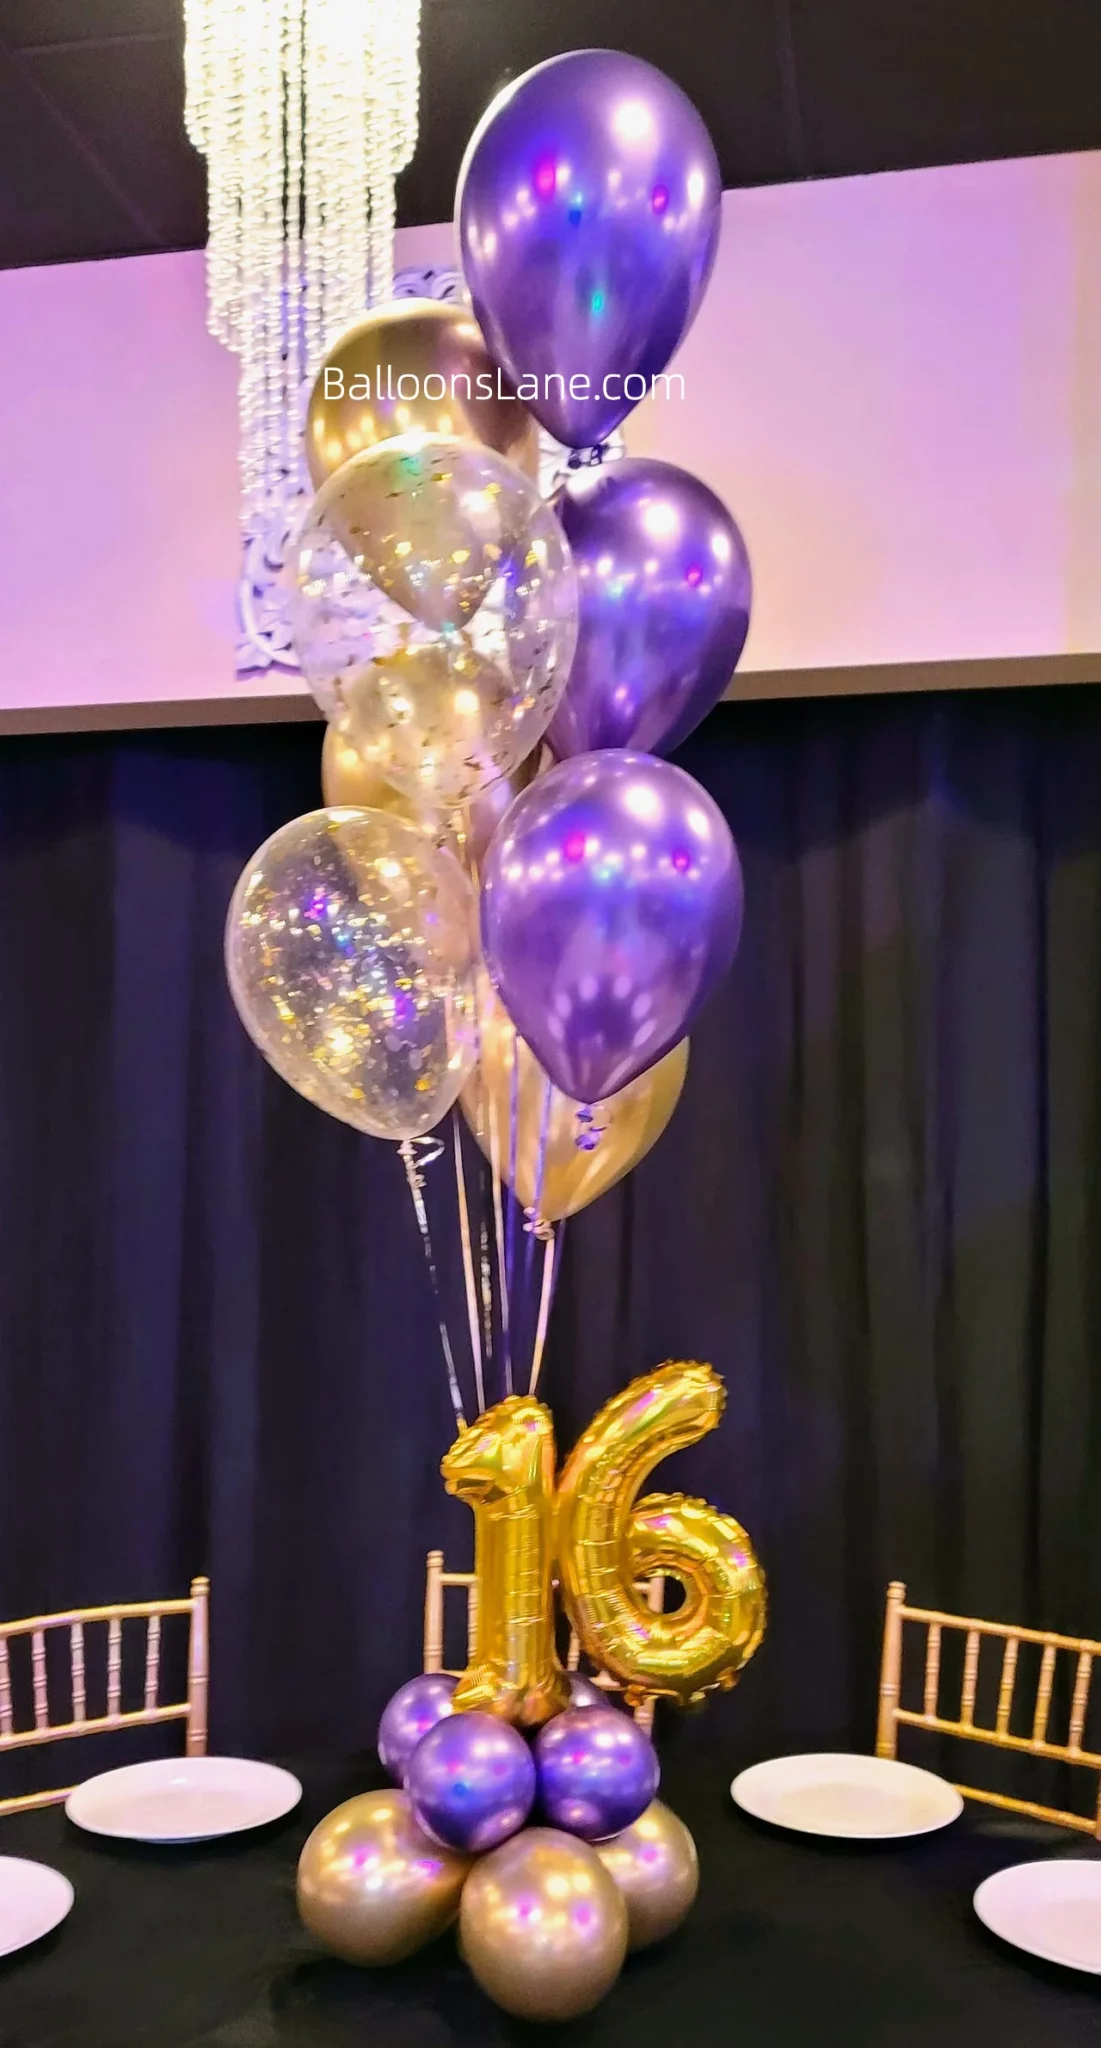 Small Number balloons 1 & 6 atop a bouquet arrangement featuring gold and purple latex balloons, a gold foil balloon, and gold confetti balloons to celebrate a birthday and anniversary in Manhattan.